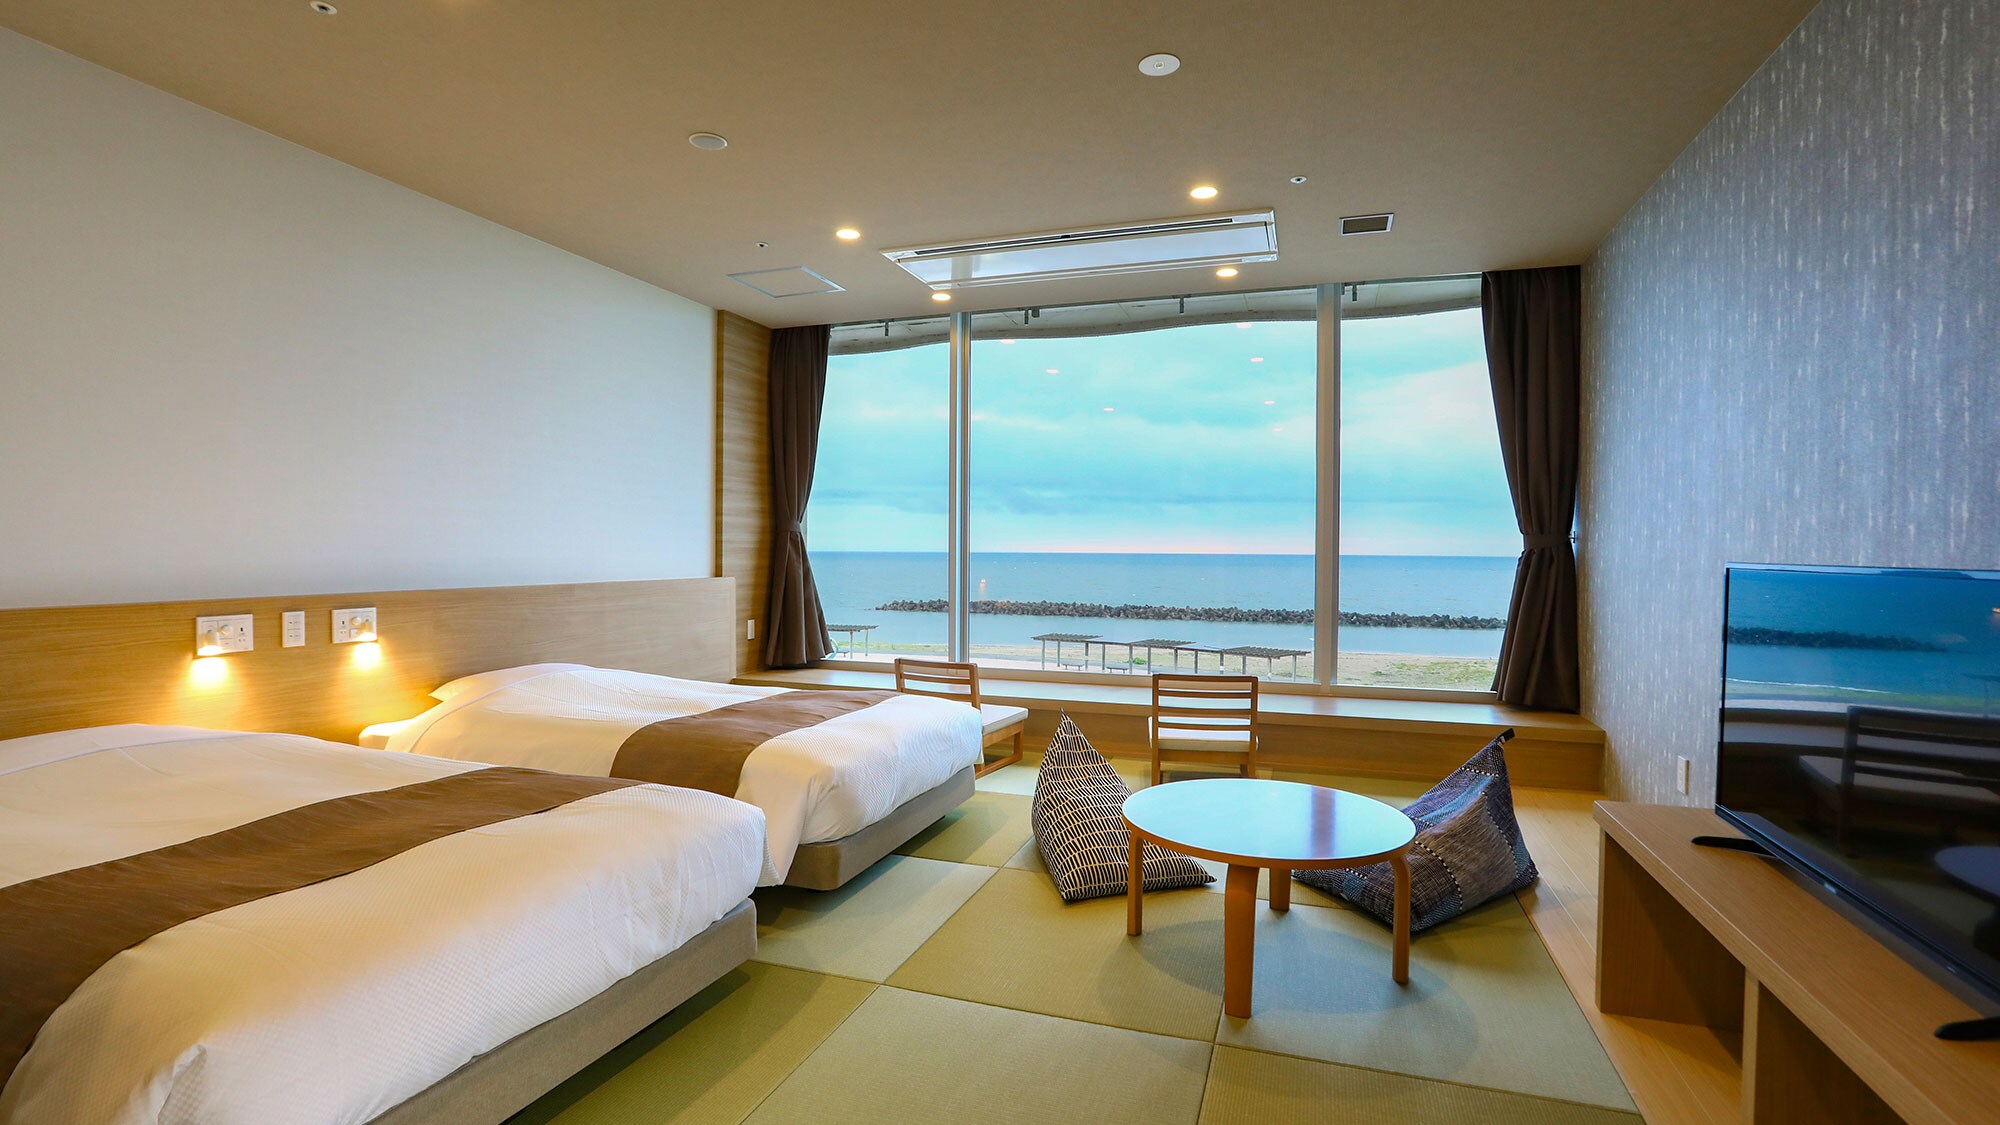 [Non-smoking / renewal] Ocean view twin Japanese-style room <3 people capacity>